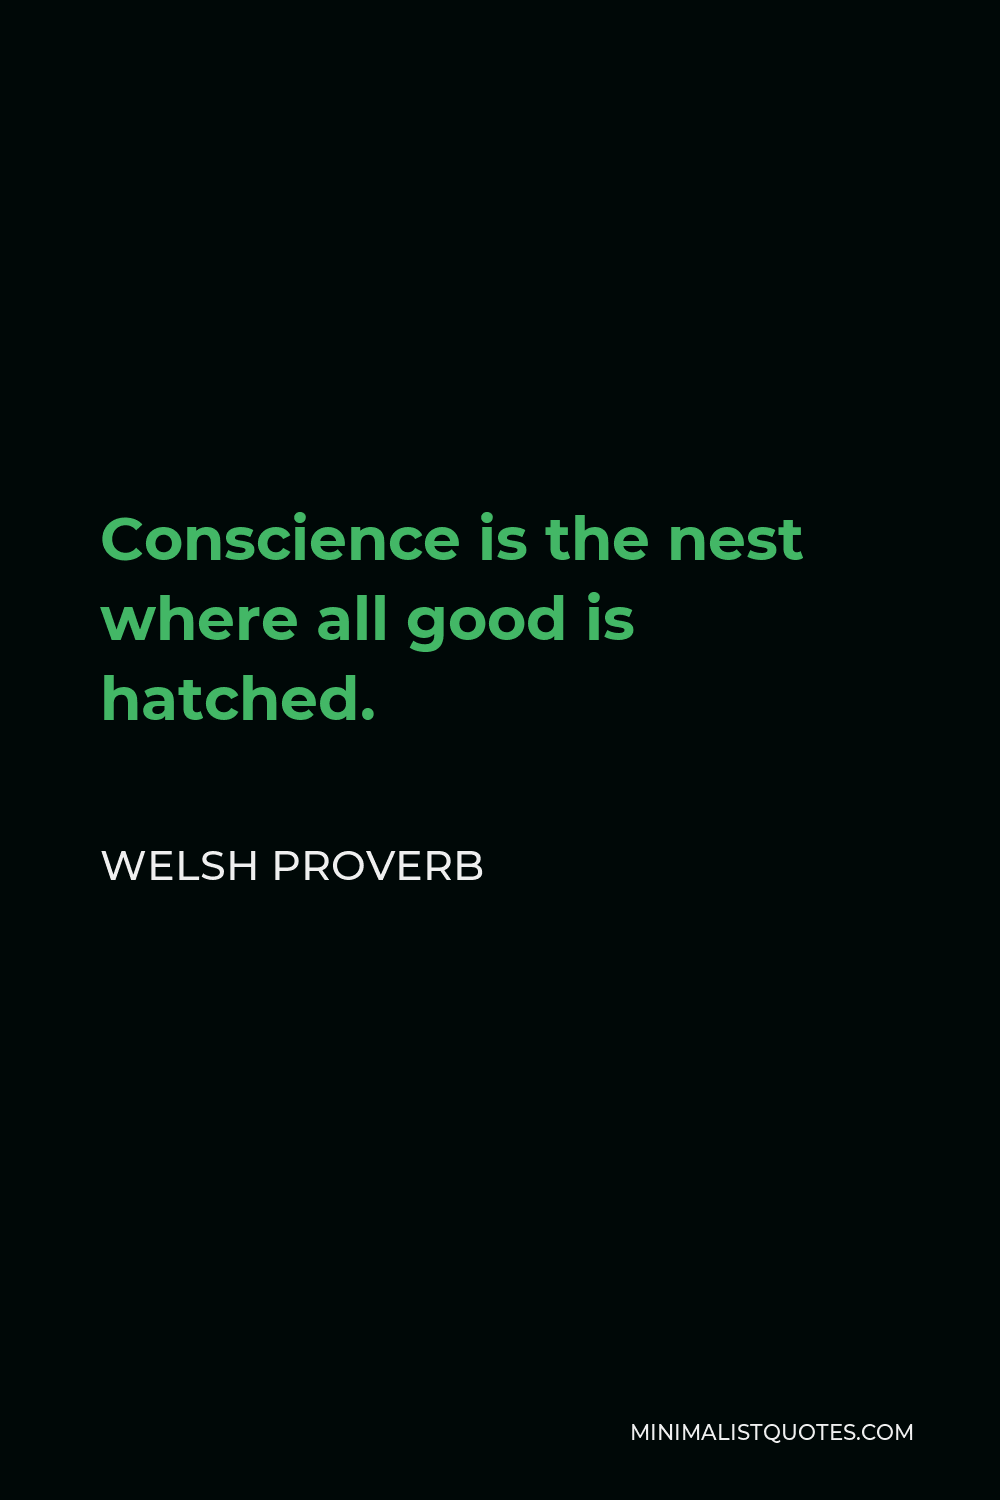 Welsh Proverb Quote - Conscience is the nest where all good is hatched.